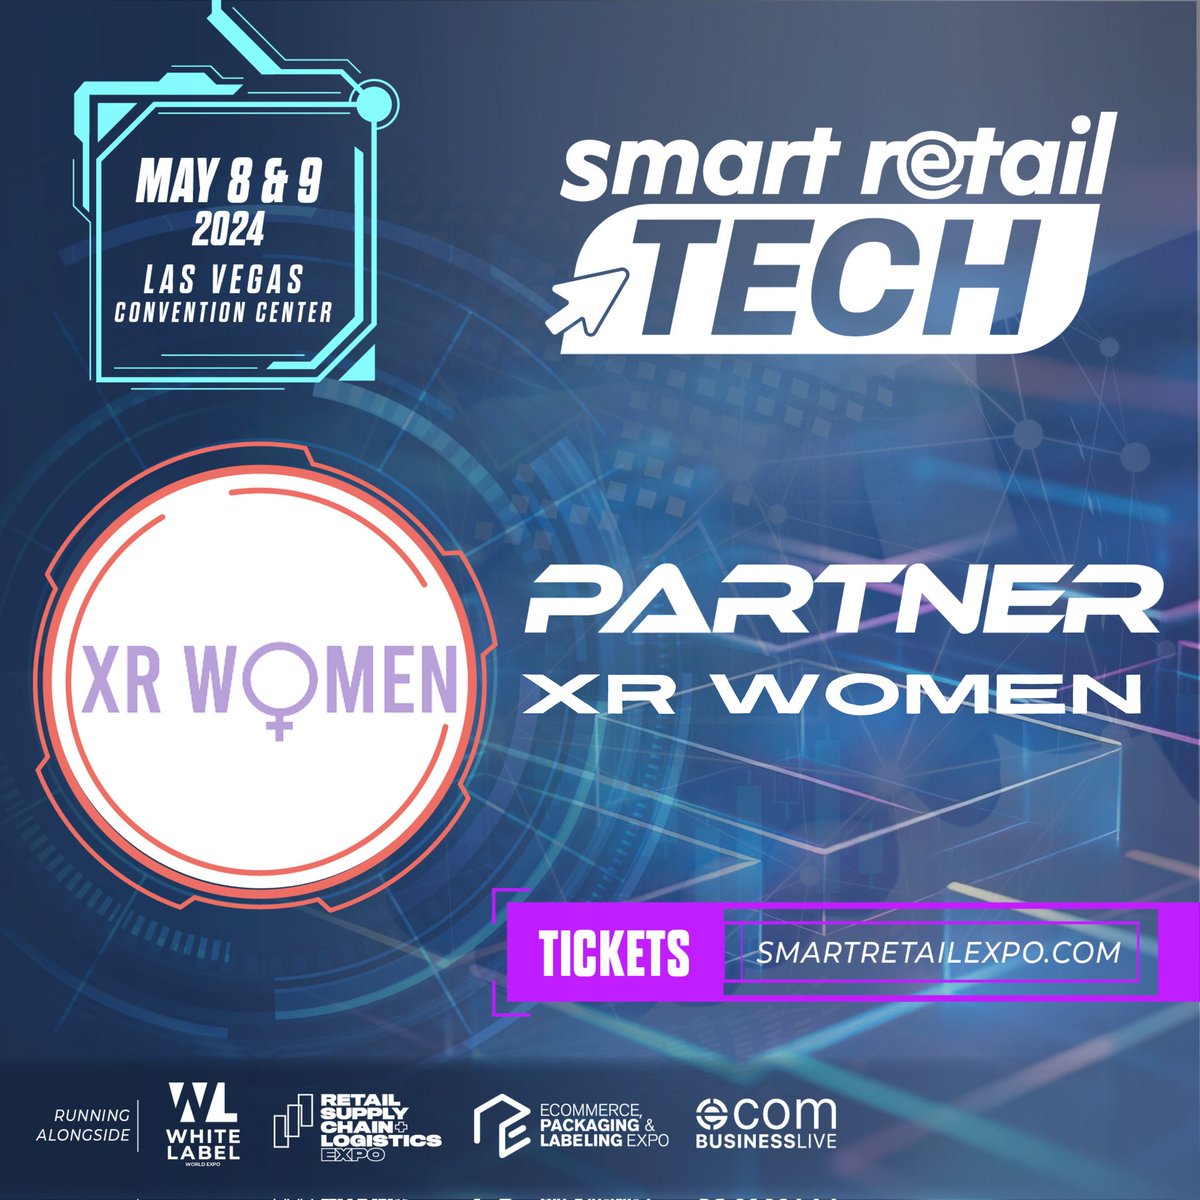 See you at @smartretailexpo in Las Vegas on May 8-9, the leading event bringing digital innovation to the retail sector! Where? Las Vegas Convention Center Use our exclusive promo code: XRWomen100 to register for free! 🎫 bitly.ws/3f9h8 #SmartRetailTechLV #XRWomen